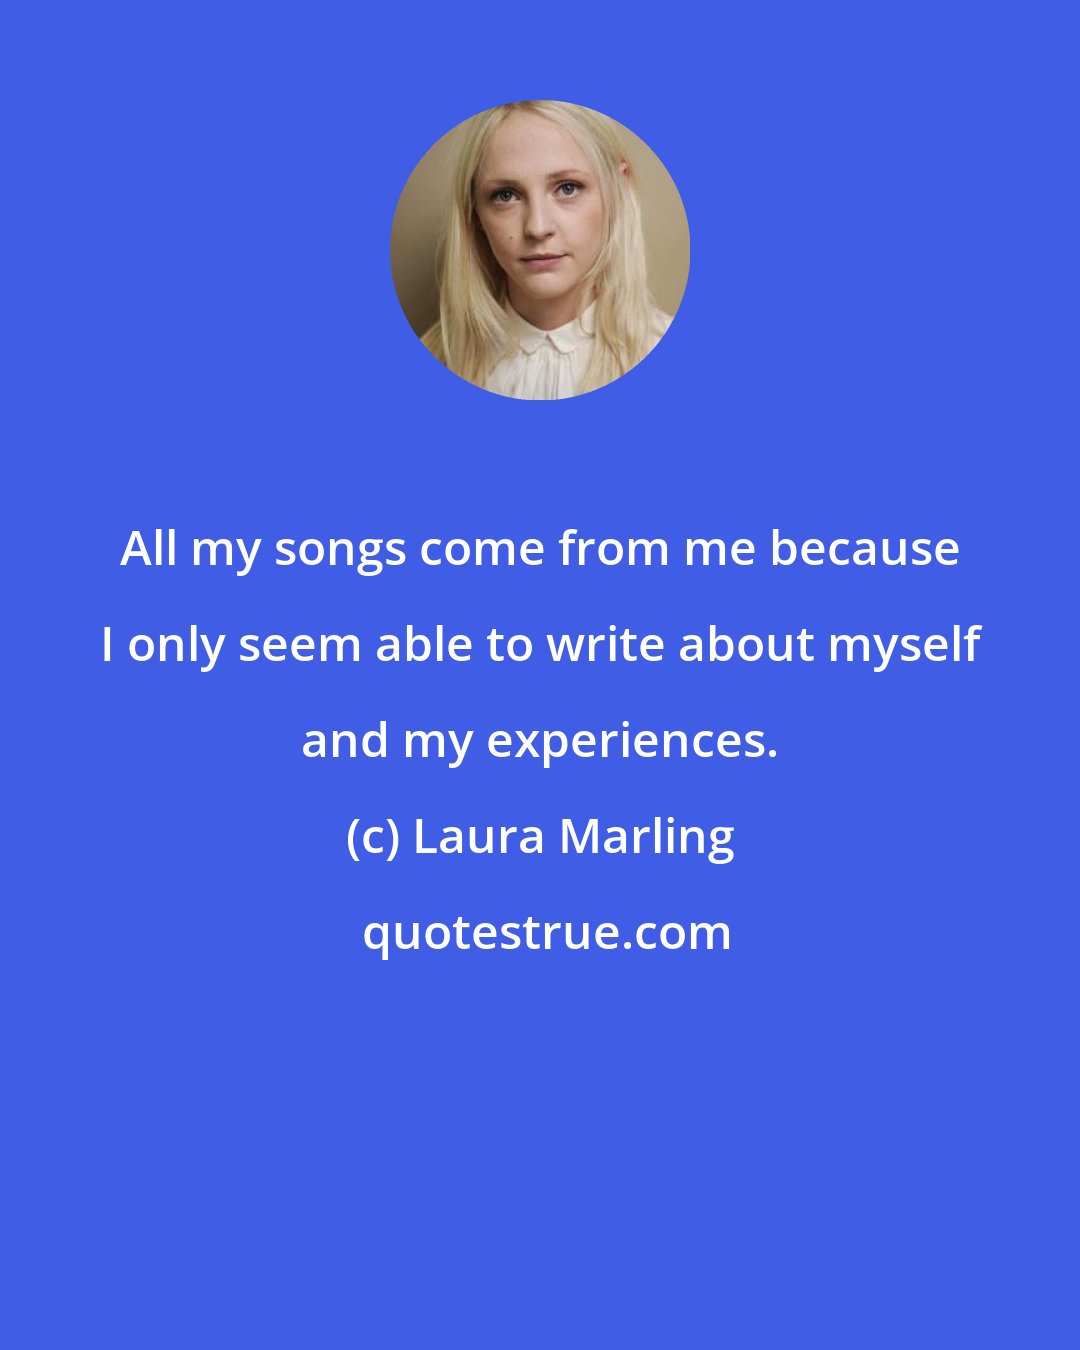 Laura Marling: All my songs come from me because I only seem able to write about myself and my experiences.